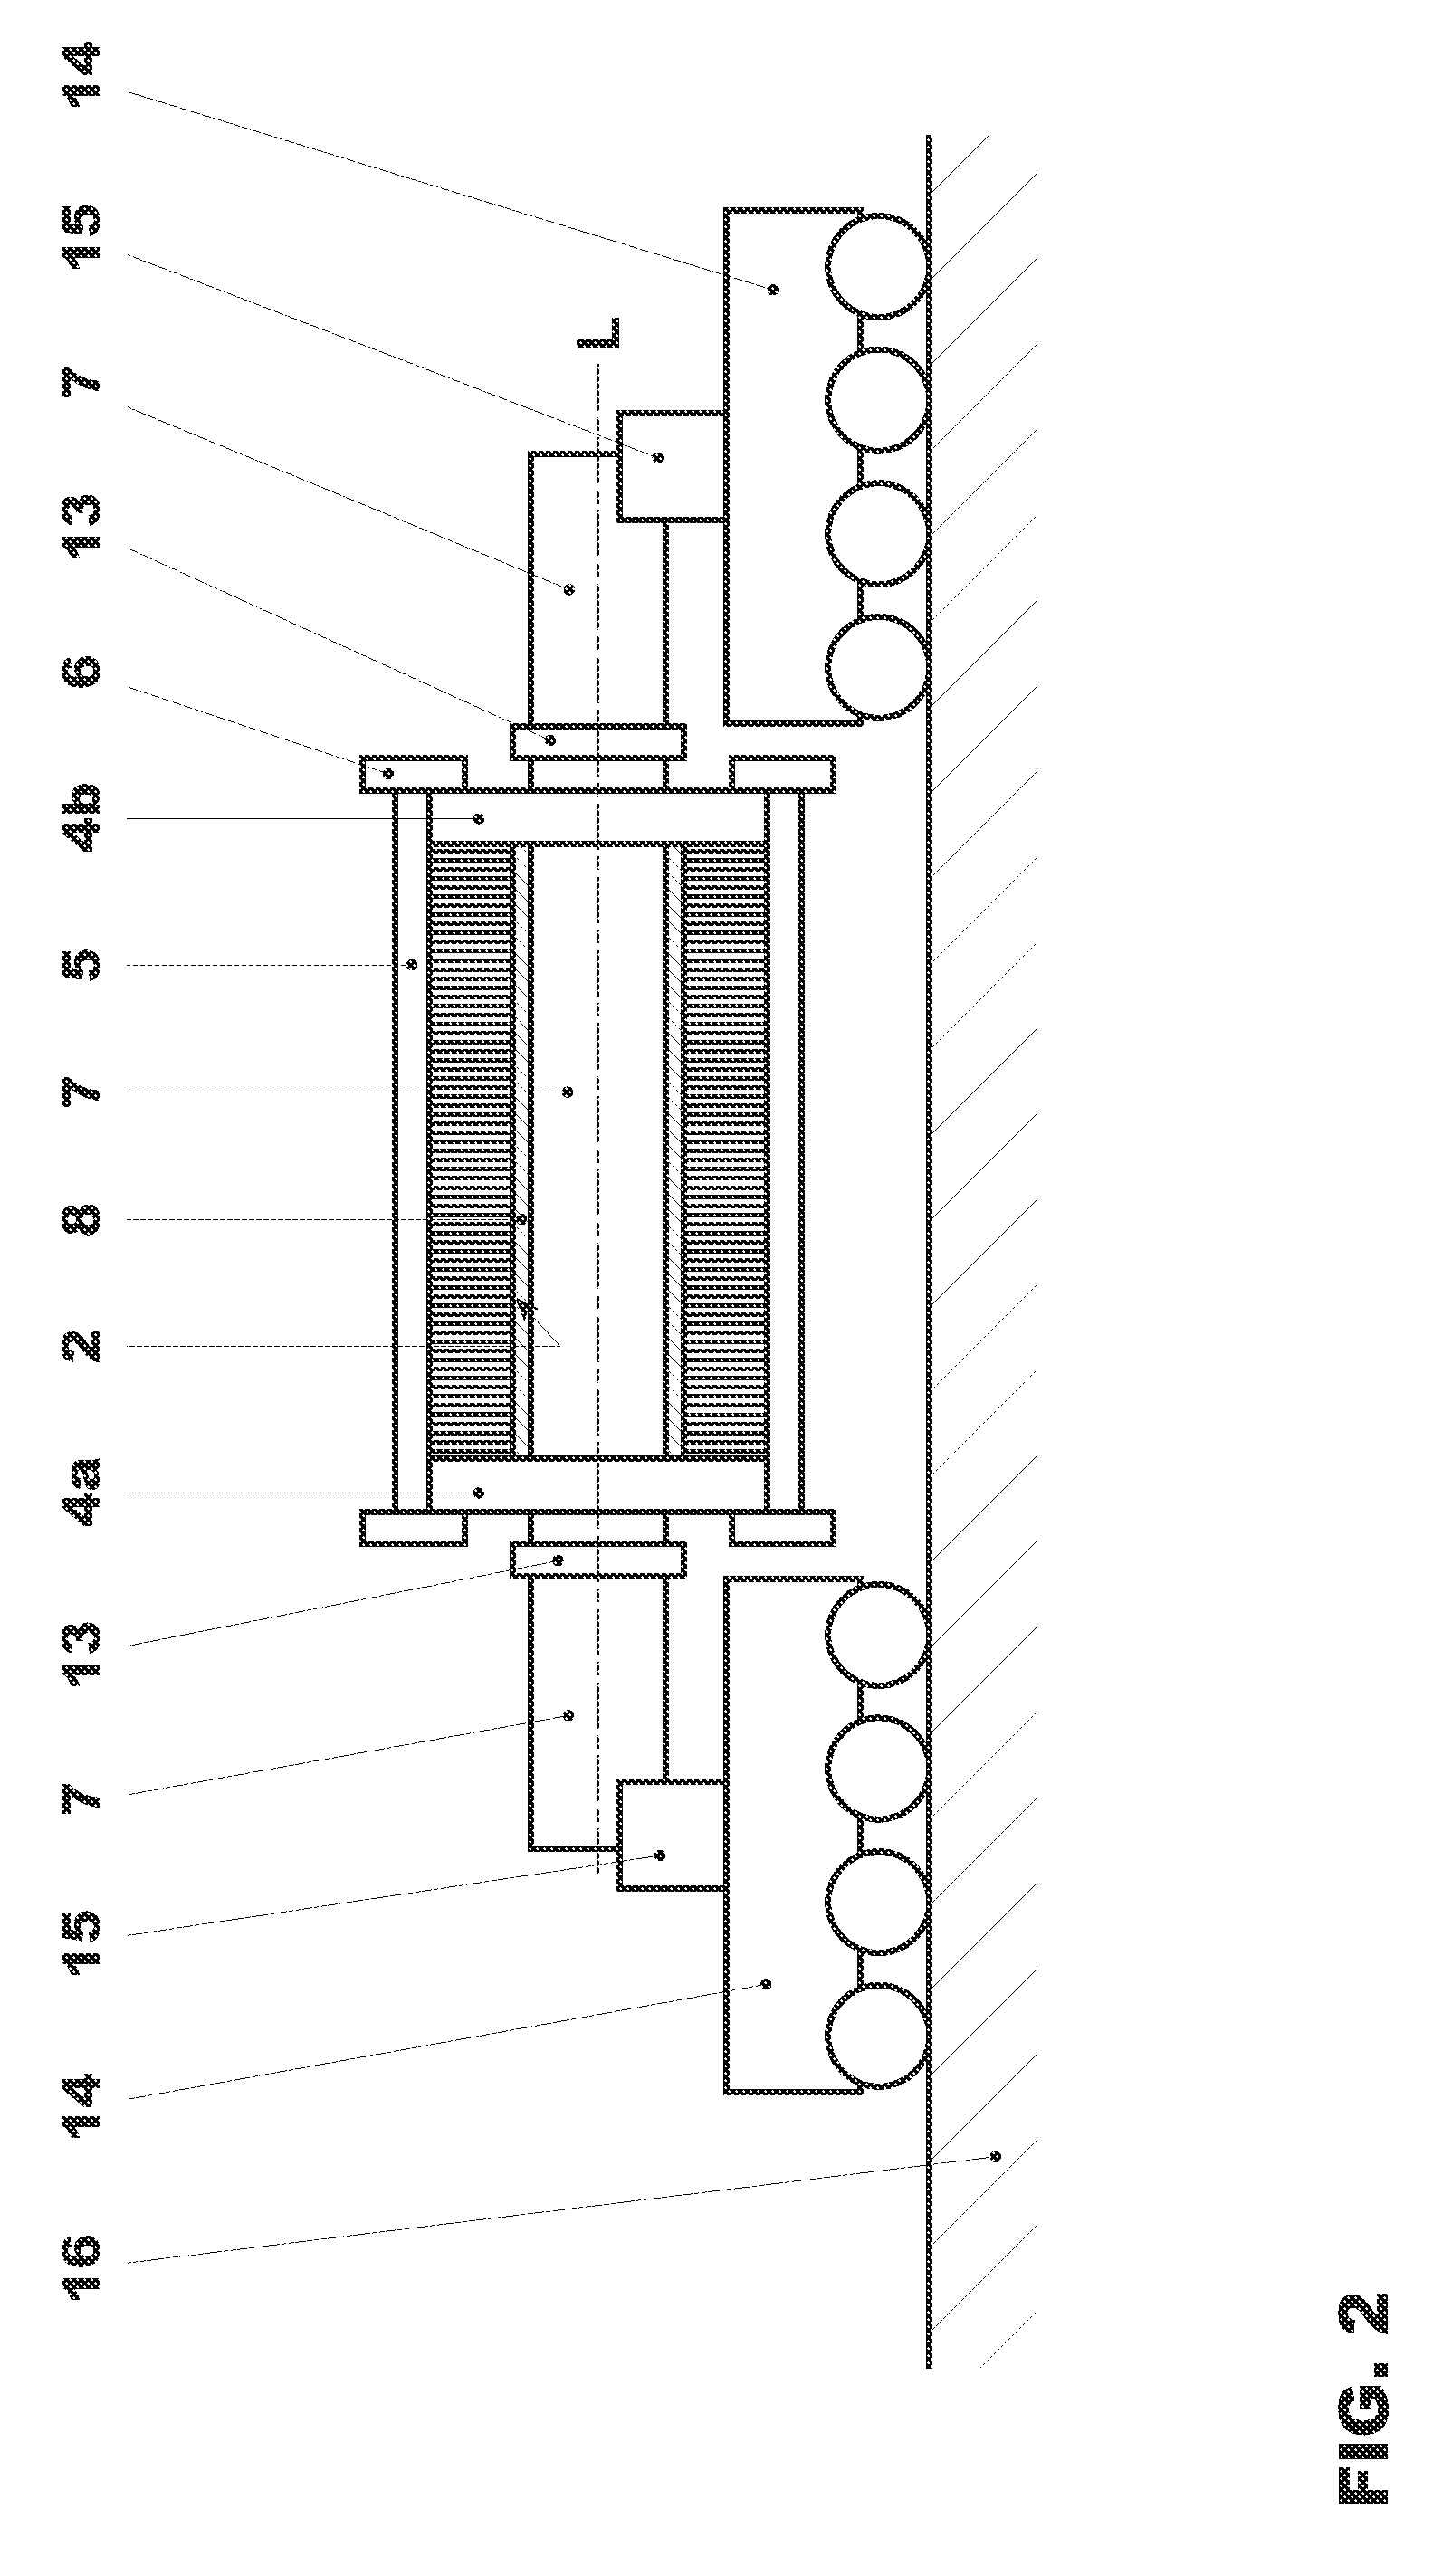 Method for manufacturing and transport of a generator stator core